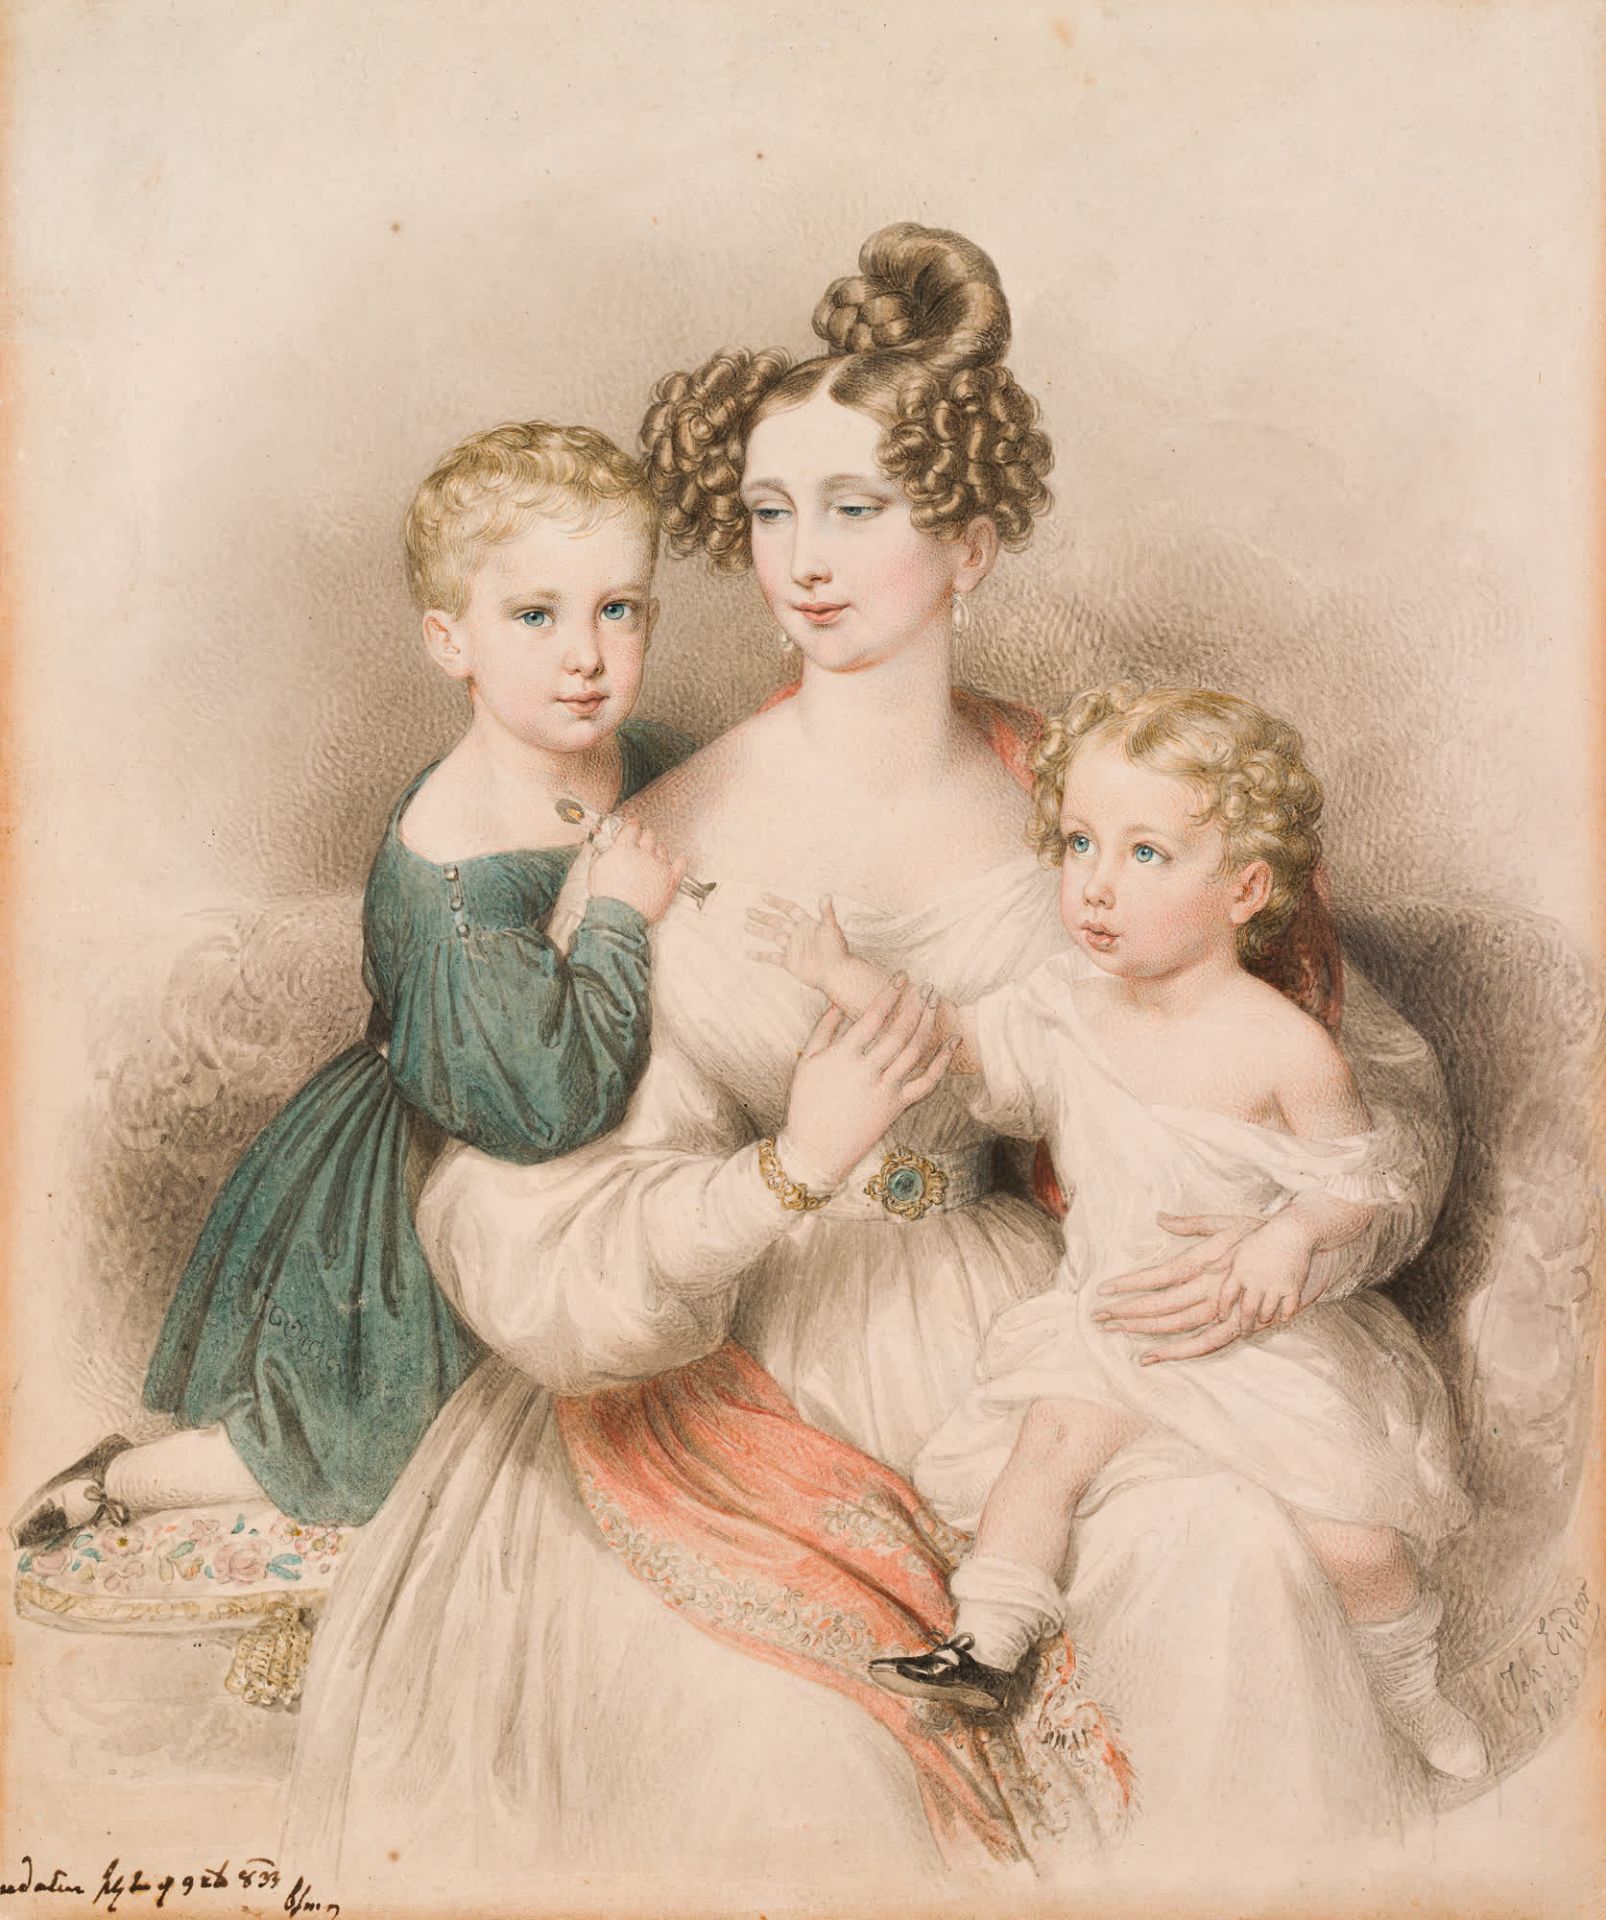 Johann Nepomuk Ender: Archduchess Sophie with her sons Franz Joseph and Ferdinand Maximilian